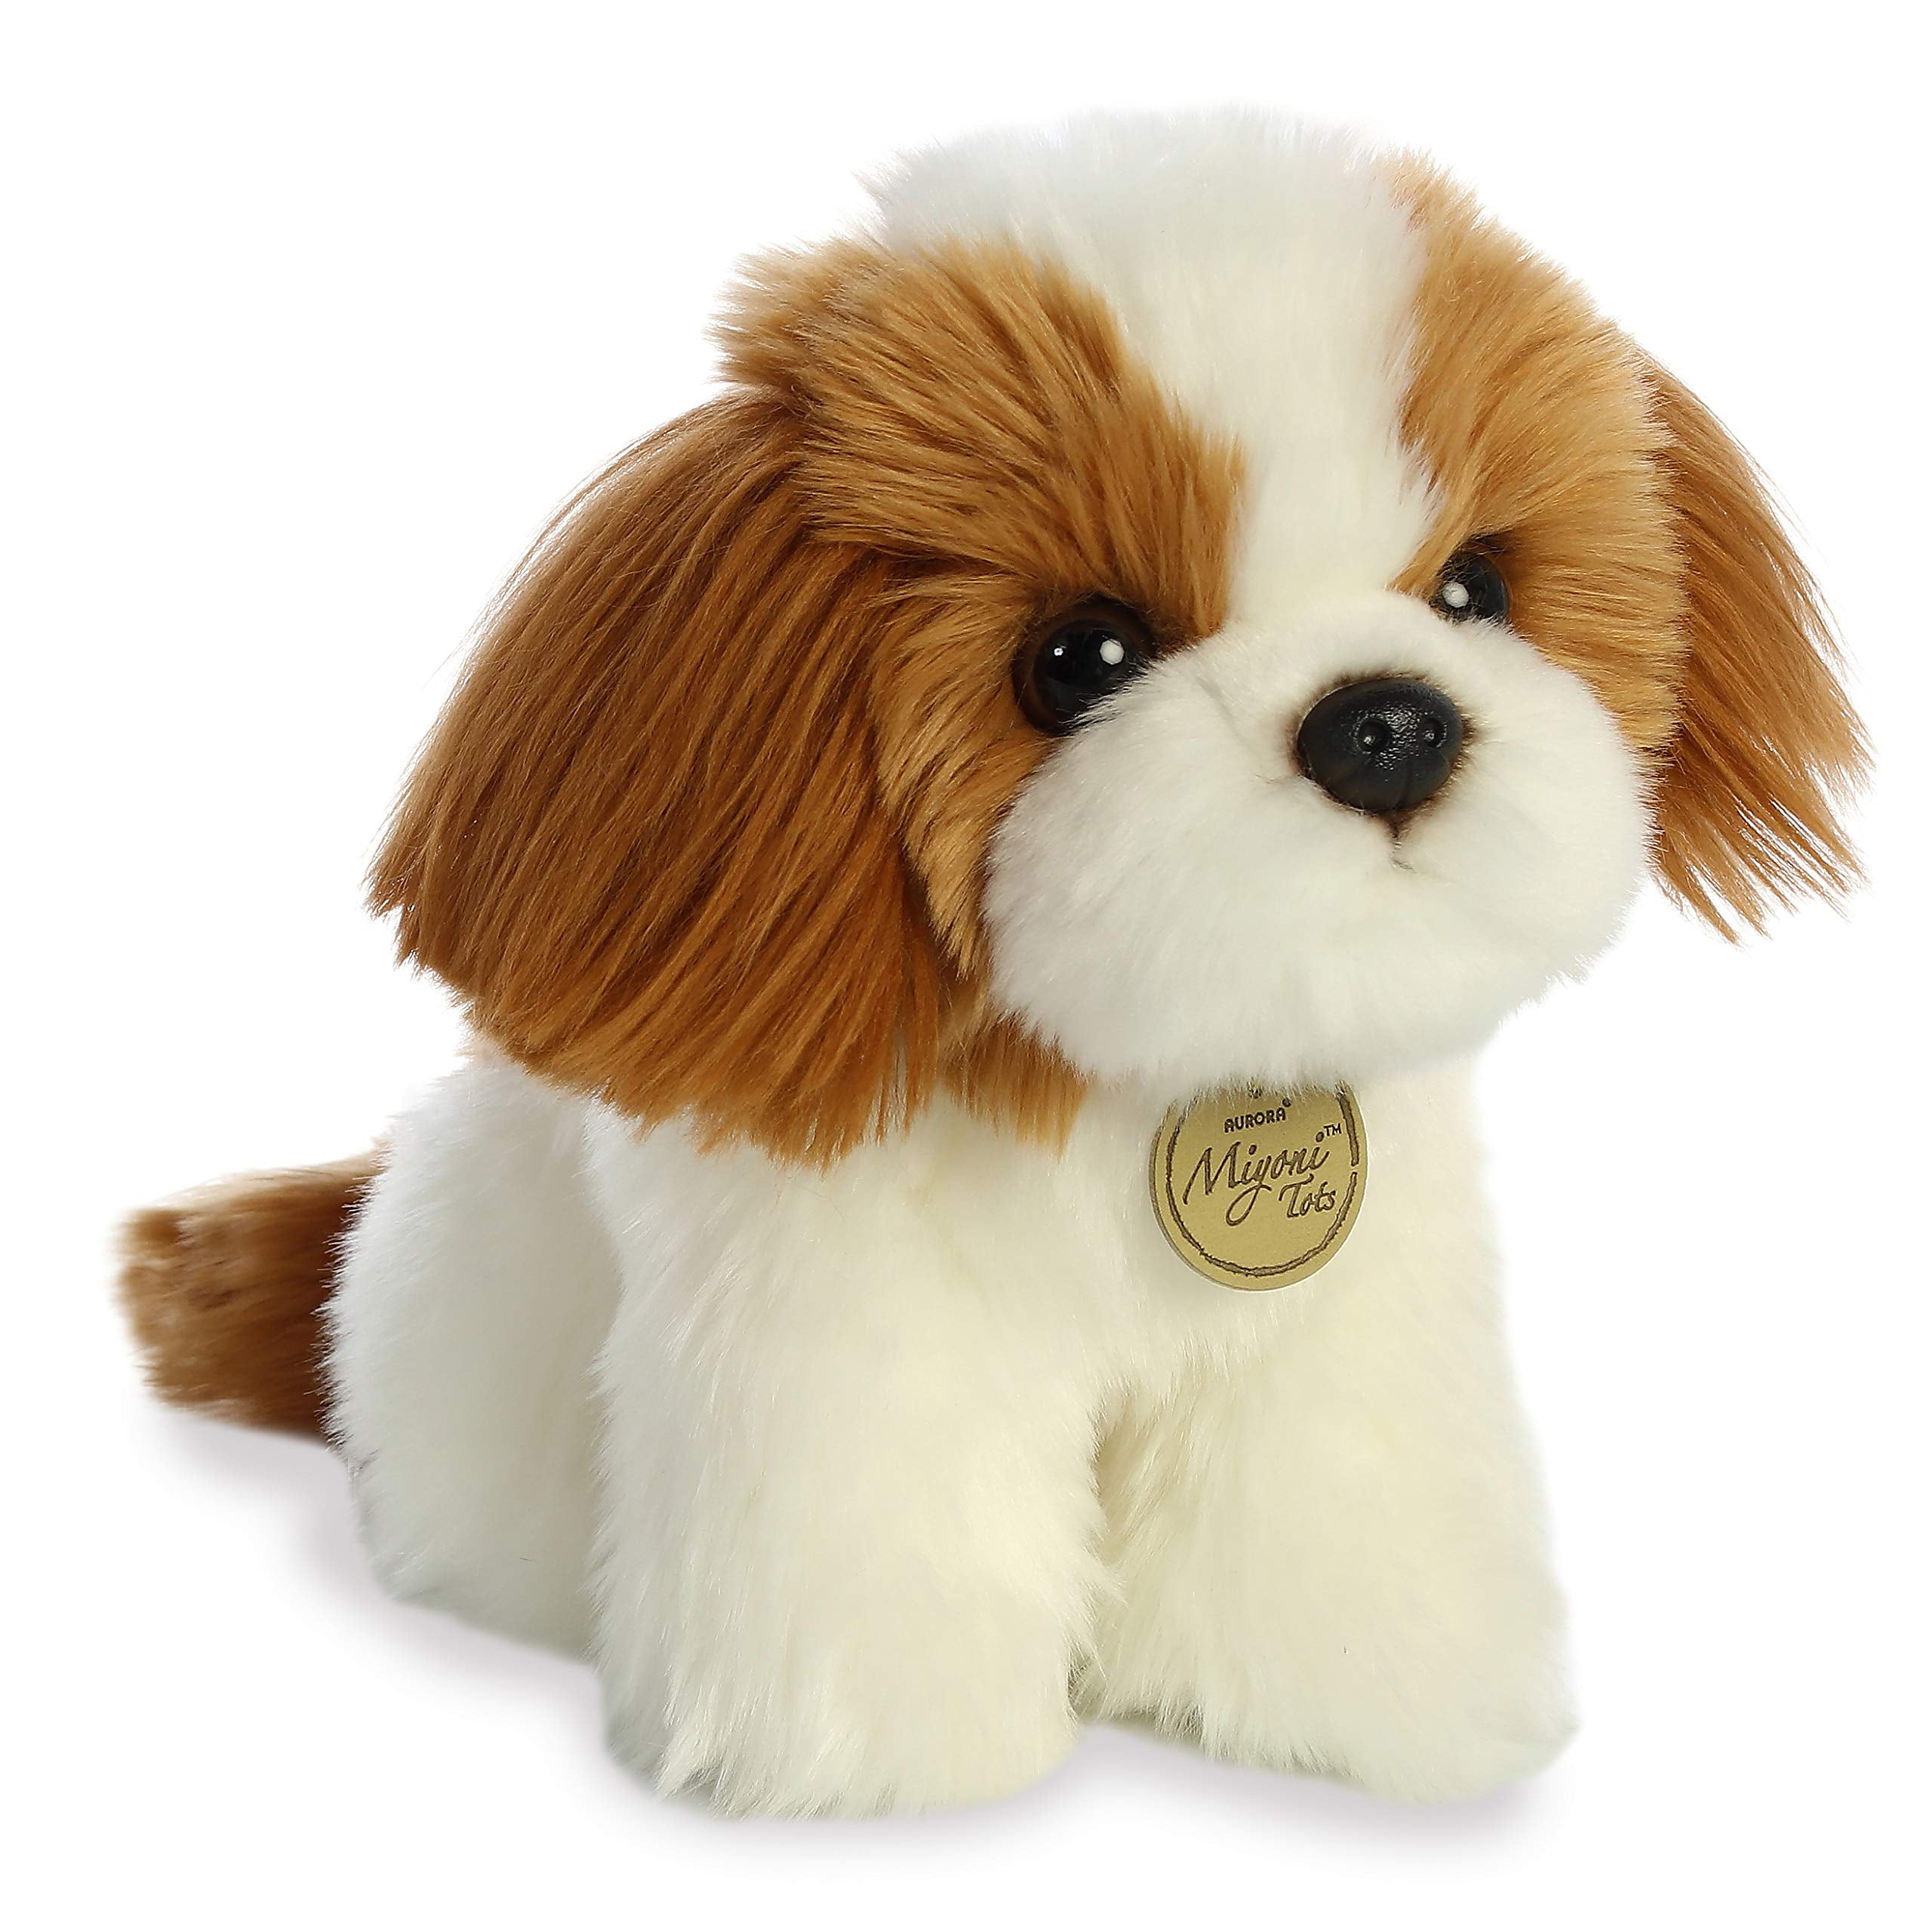 Plush Dog SHIH TZU Soft Cute Toy Stuffed Animal Branded Collectible Gift 